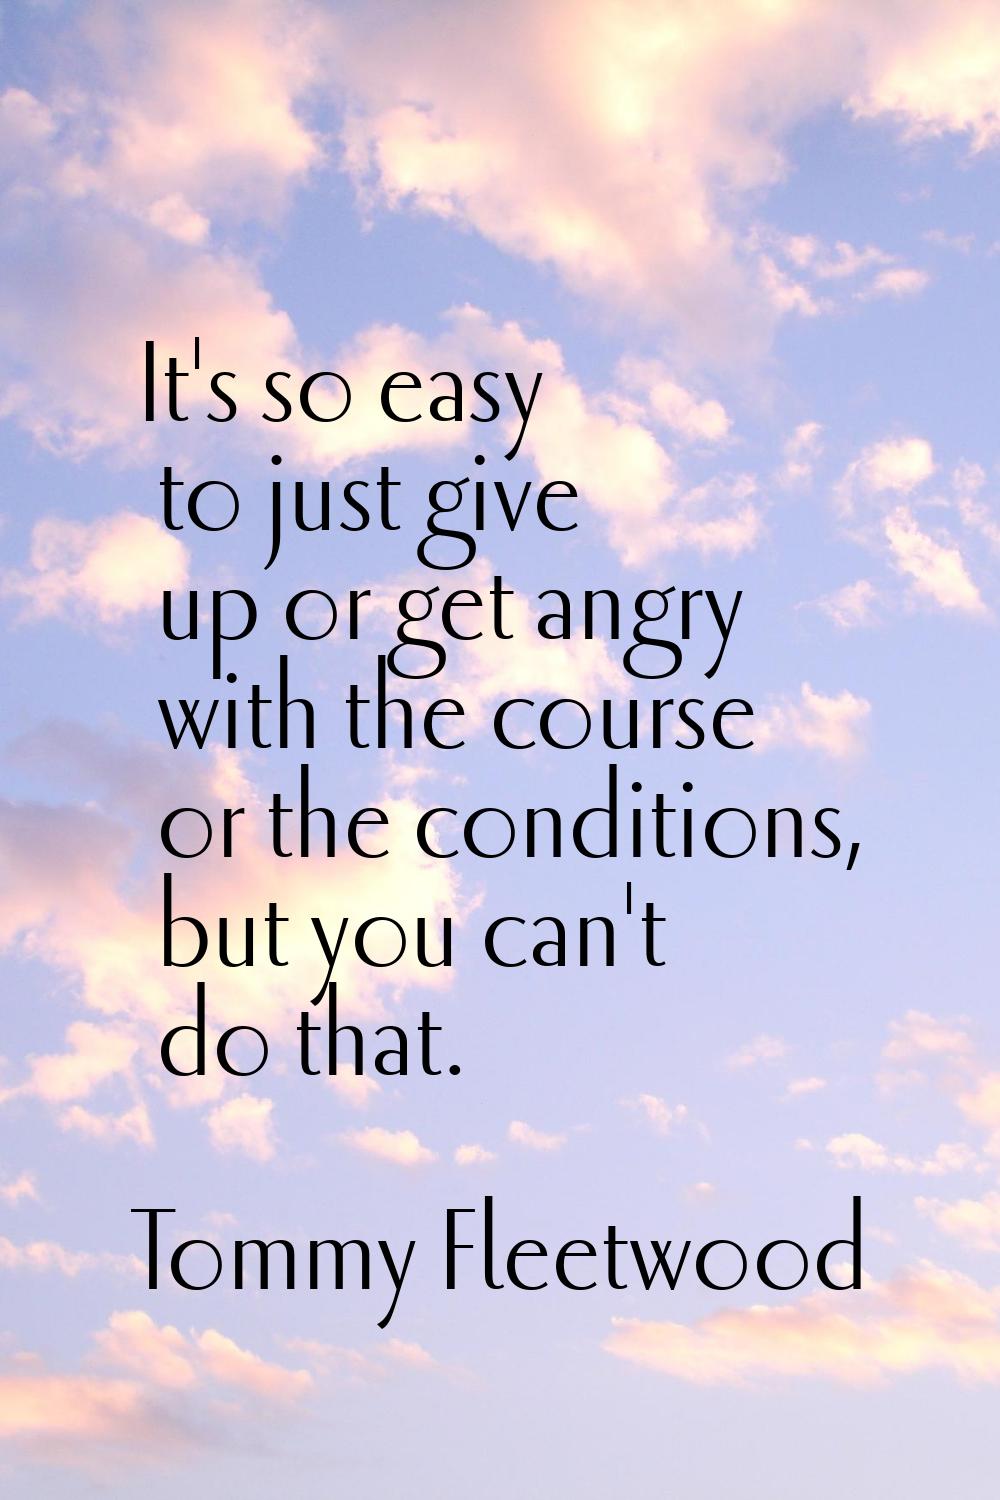 It's so easy to just give up or get angry with the course or the conditions, but you can't do that.